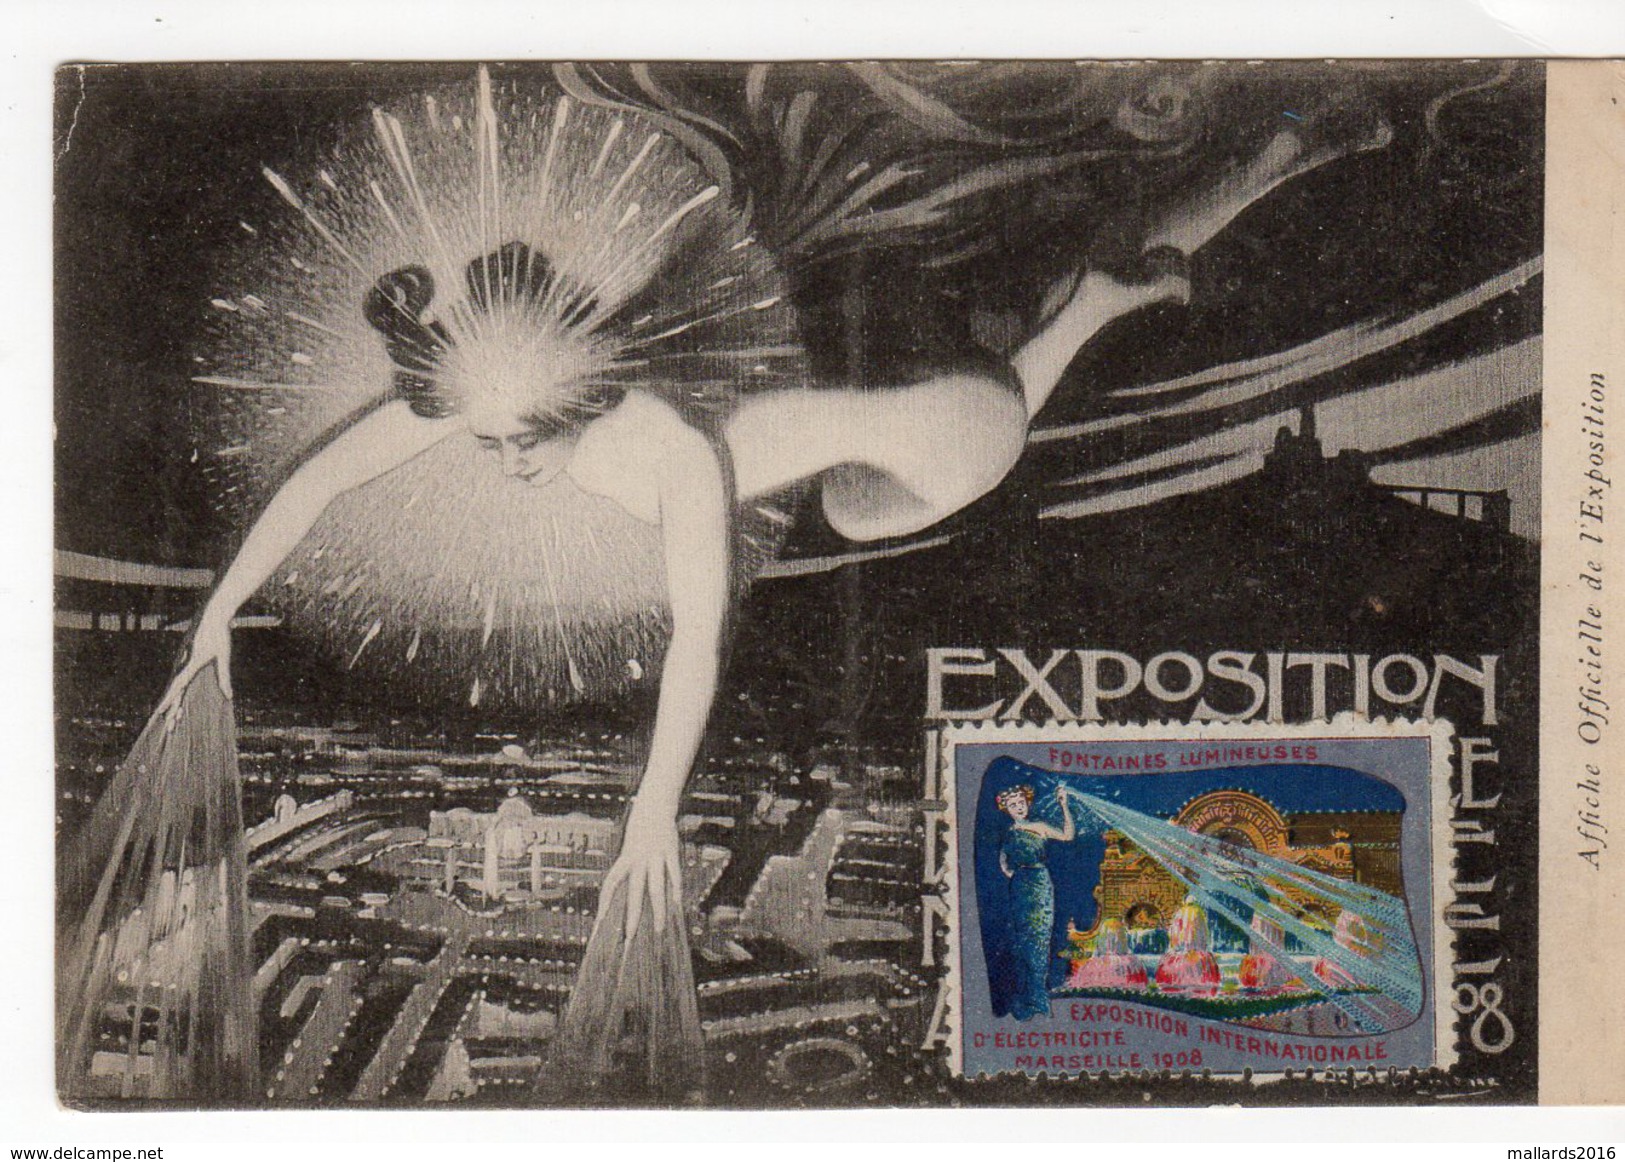 MARSEILLE EXPOSITION OF 1908 ~ A VINTAGE POSTCARD (k1) - Expositions Coloniales 1906 - 1922